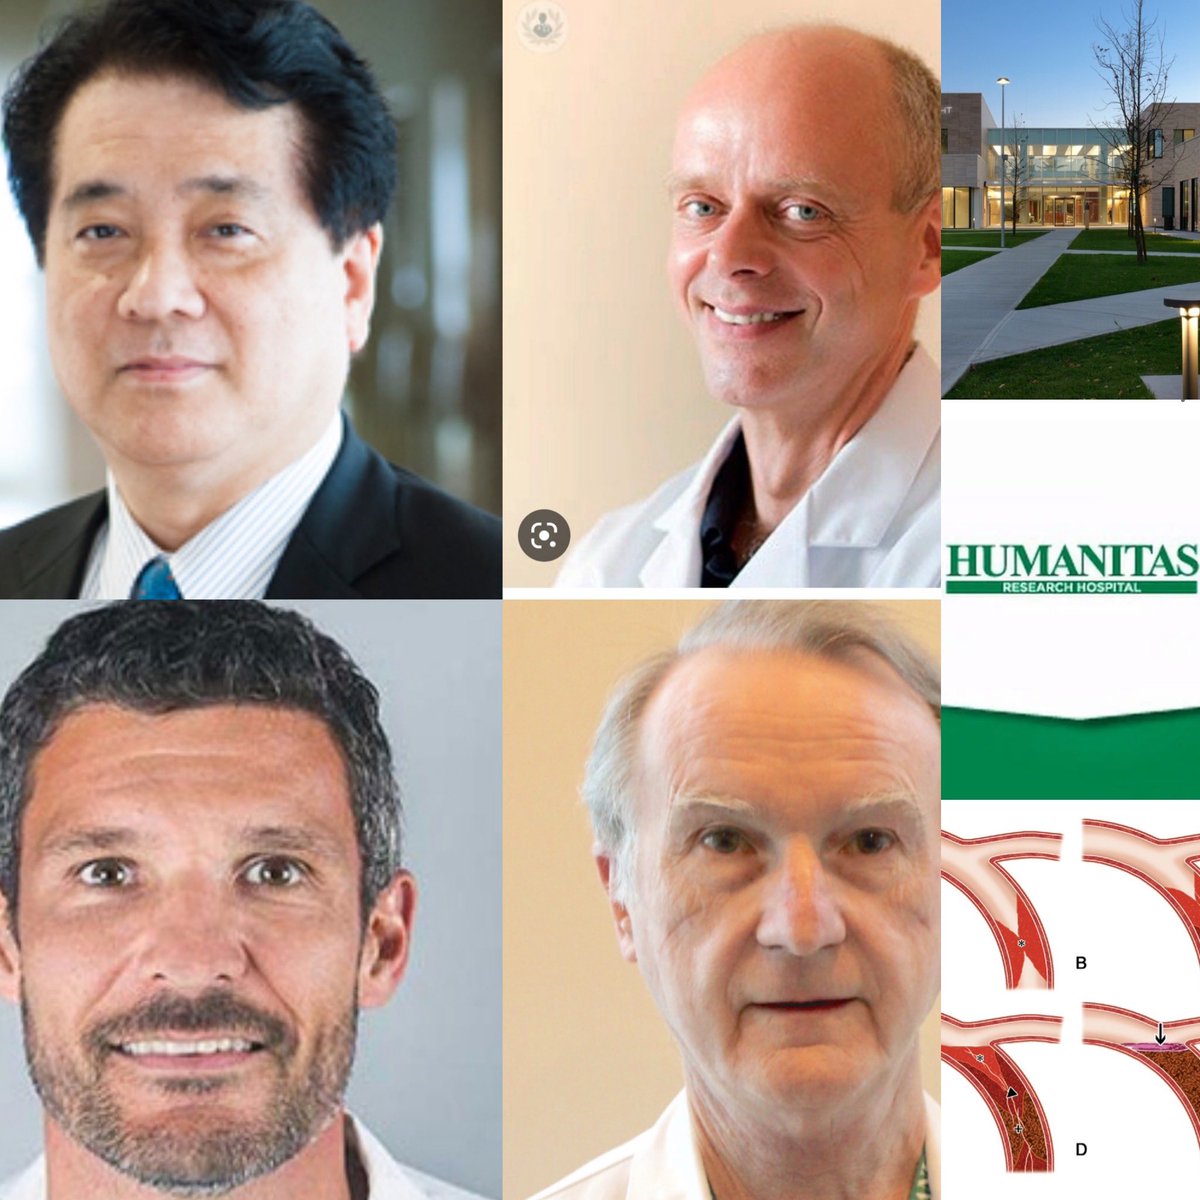 April 27 & 28 @HumanitasMilano & @HUNIMED will host a workshop on chronic coronary occlusions, with @GLGasparini, Sunao Nakamura, Bernhard Reimers and Antonio Colombo! Dedicated to young interventional oats and very practical. DM me if you want to join it